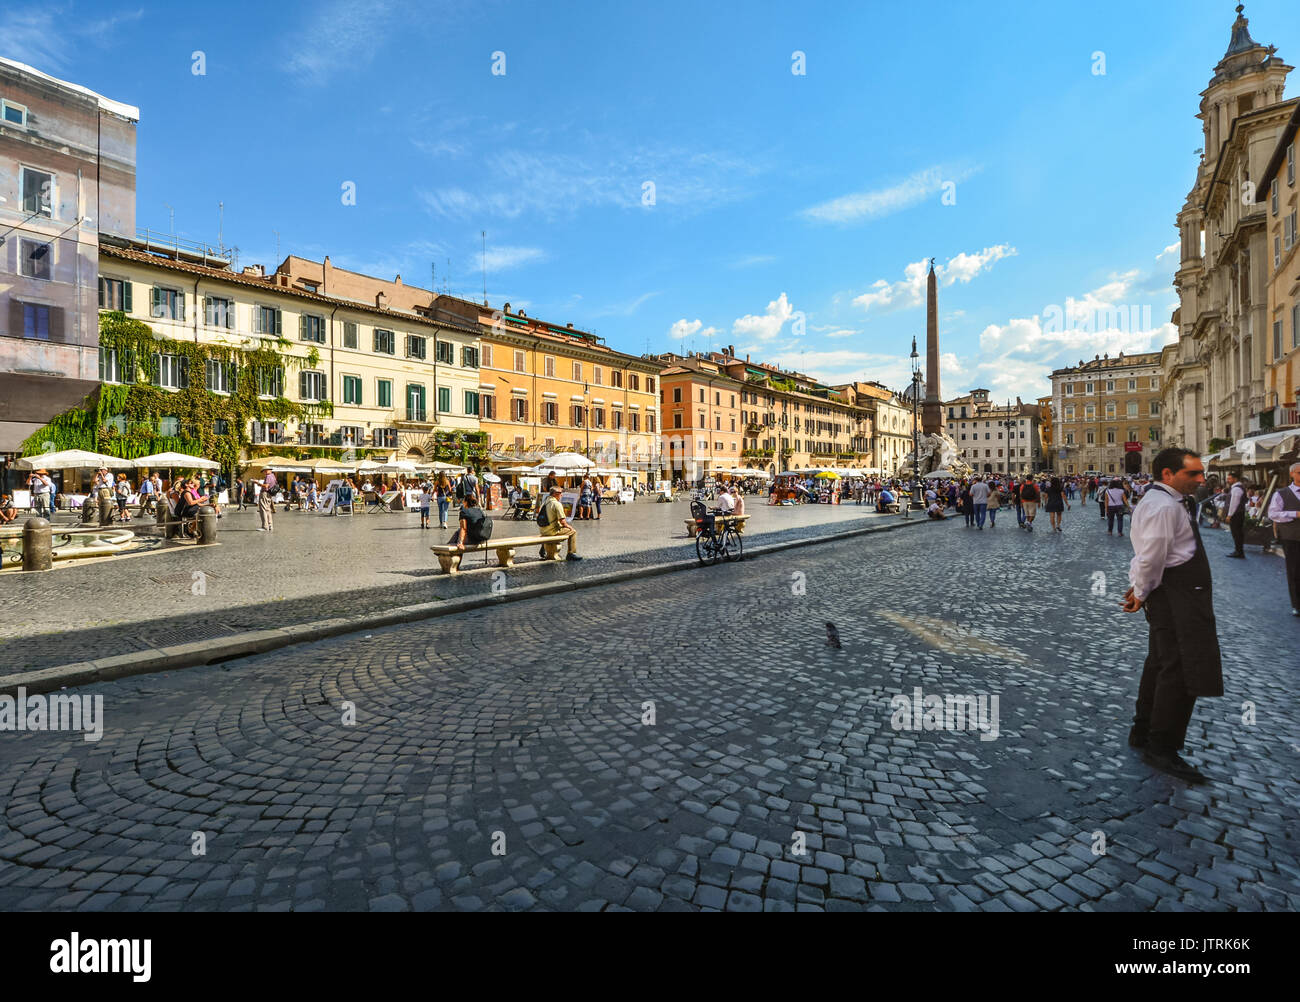 A maitre d or head waiter stands outside a cafe or restaurant in the Piazza Navona in Rome Italy on a sunny day with tourists around Stock Photo